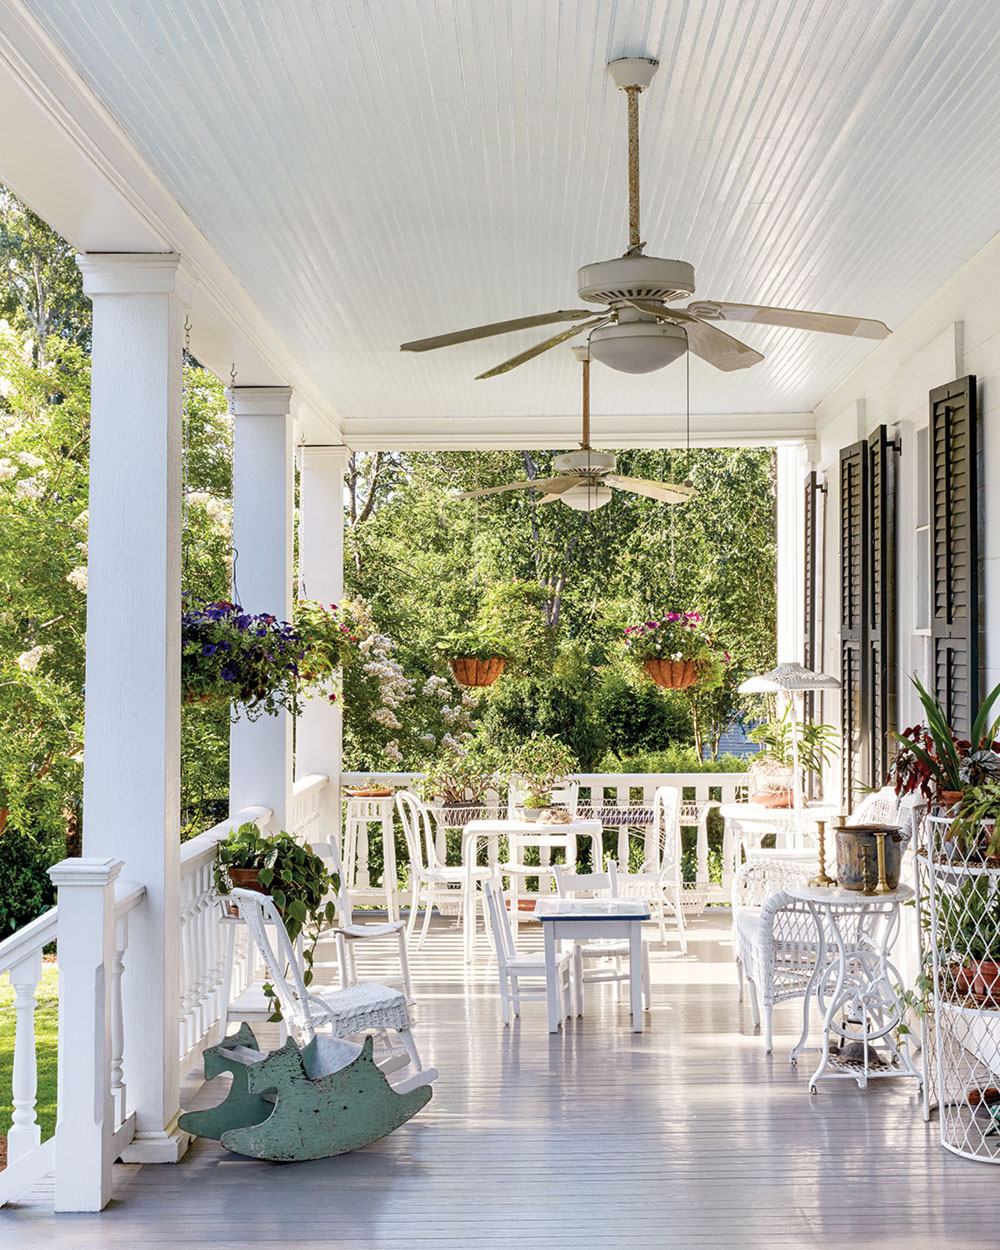 Back porch with white columns, ceiling fans, white furniture, and hanging baskets of flowers